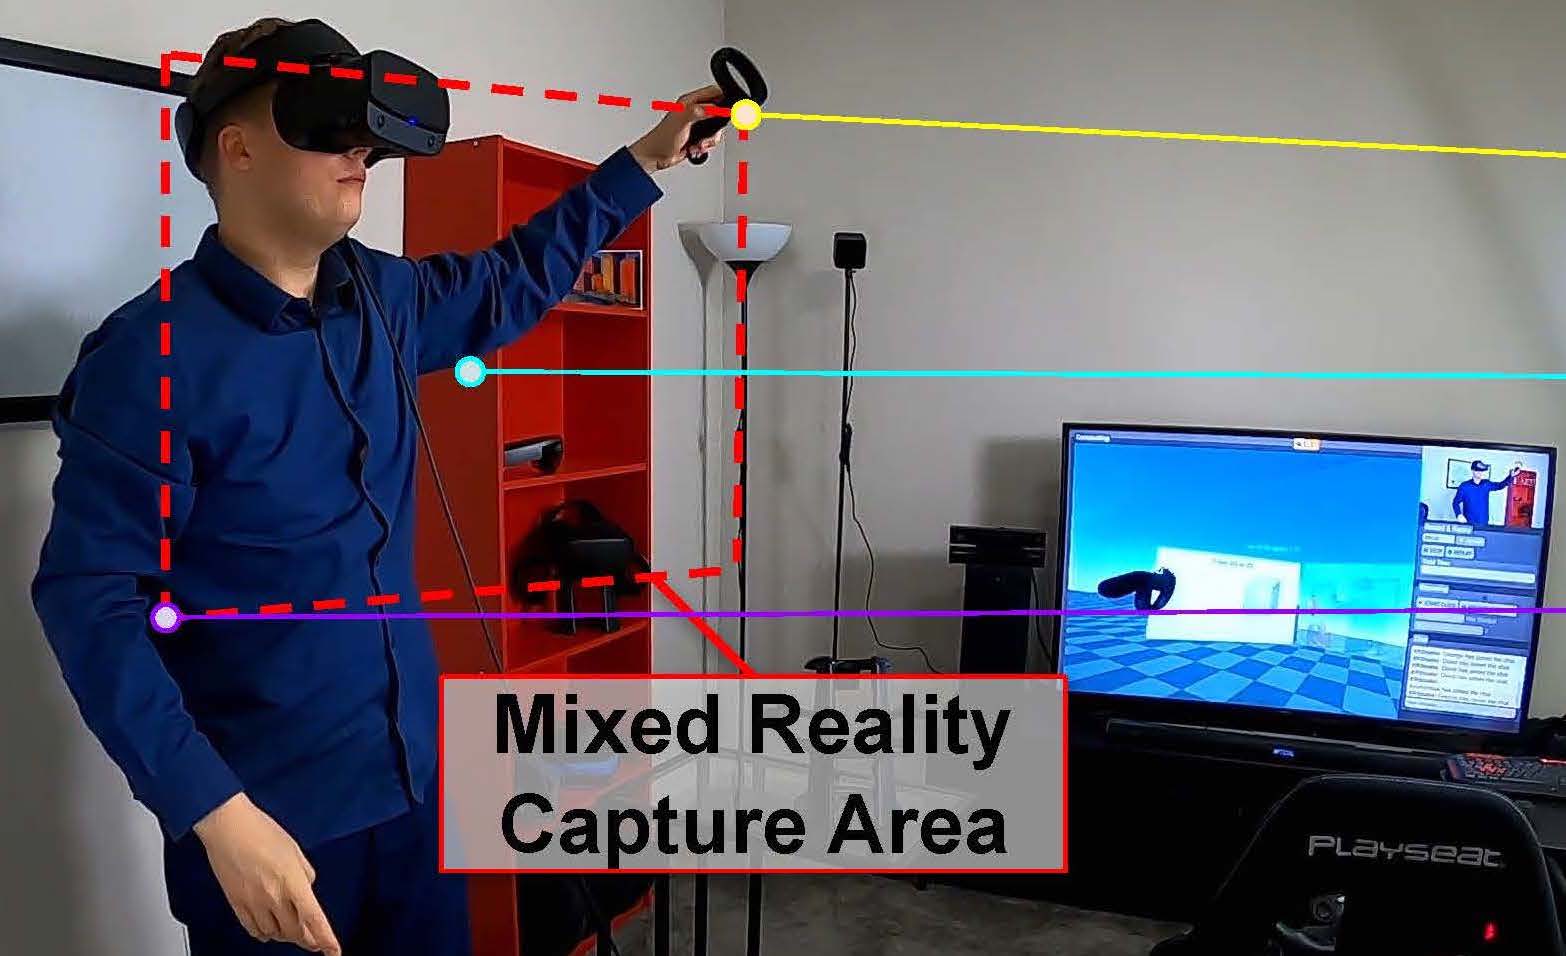 A man using a virtual reality headset, holding a controller up. There are lines drawn on top of the image to show parts of his body being tracked for XRStudio configuration